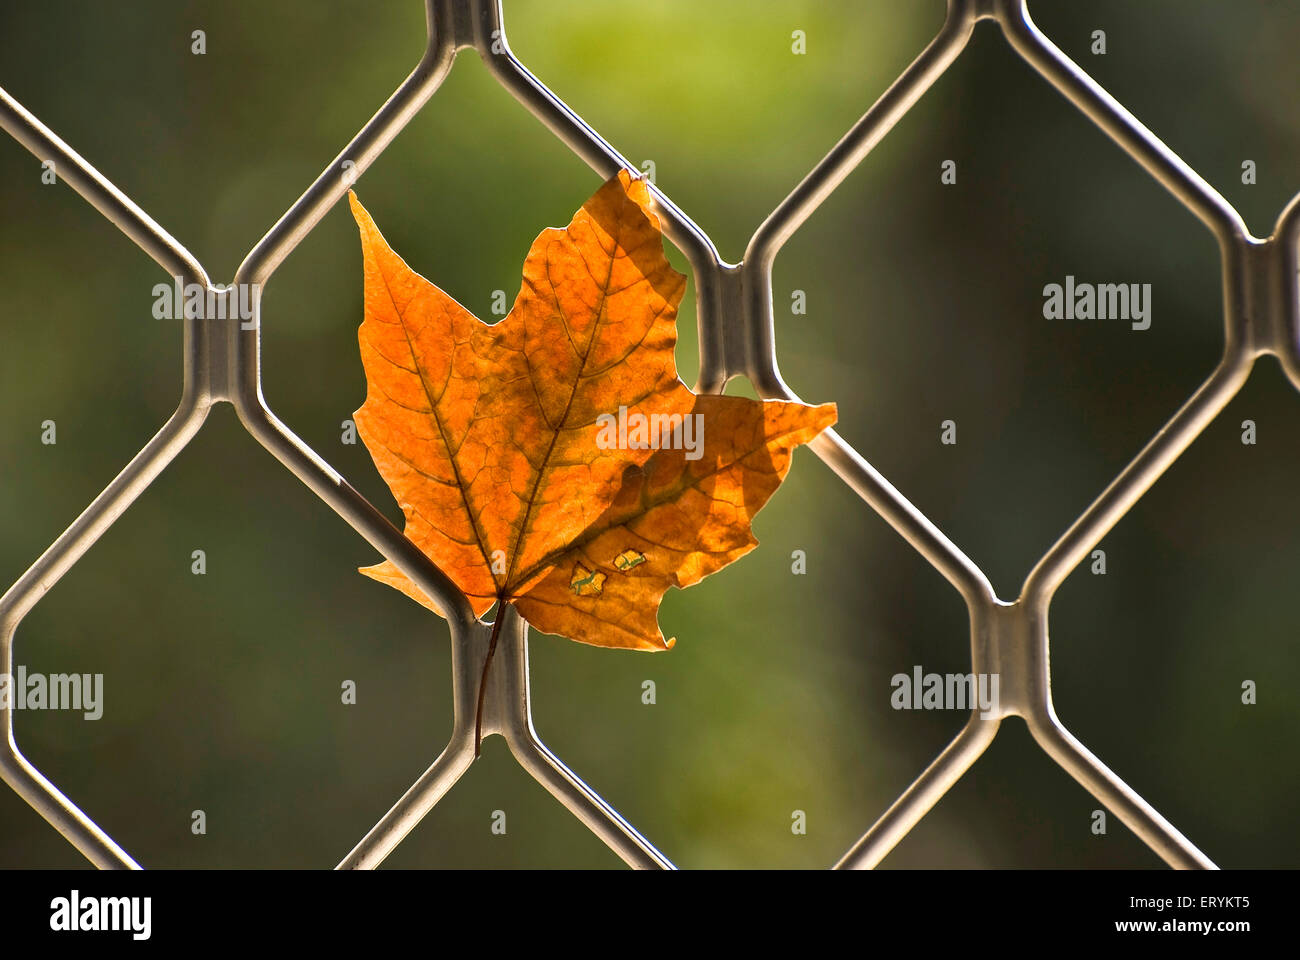 Maple leaves dried withered in autumn and trapped in window grill Stock Photo